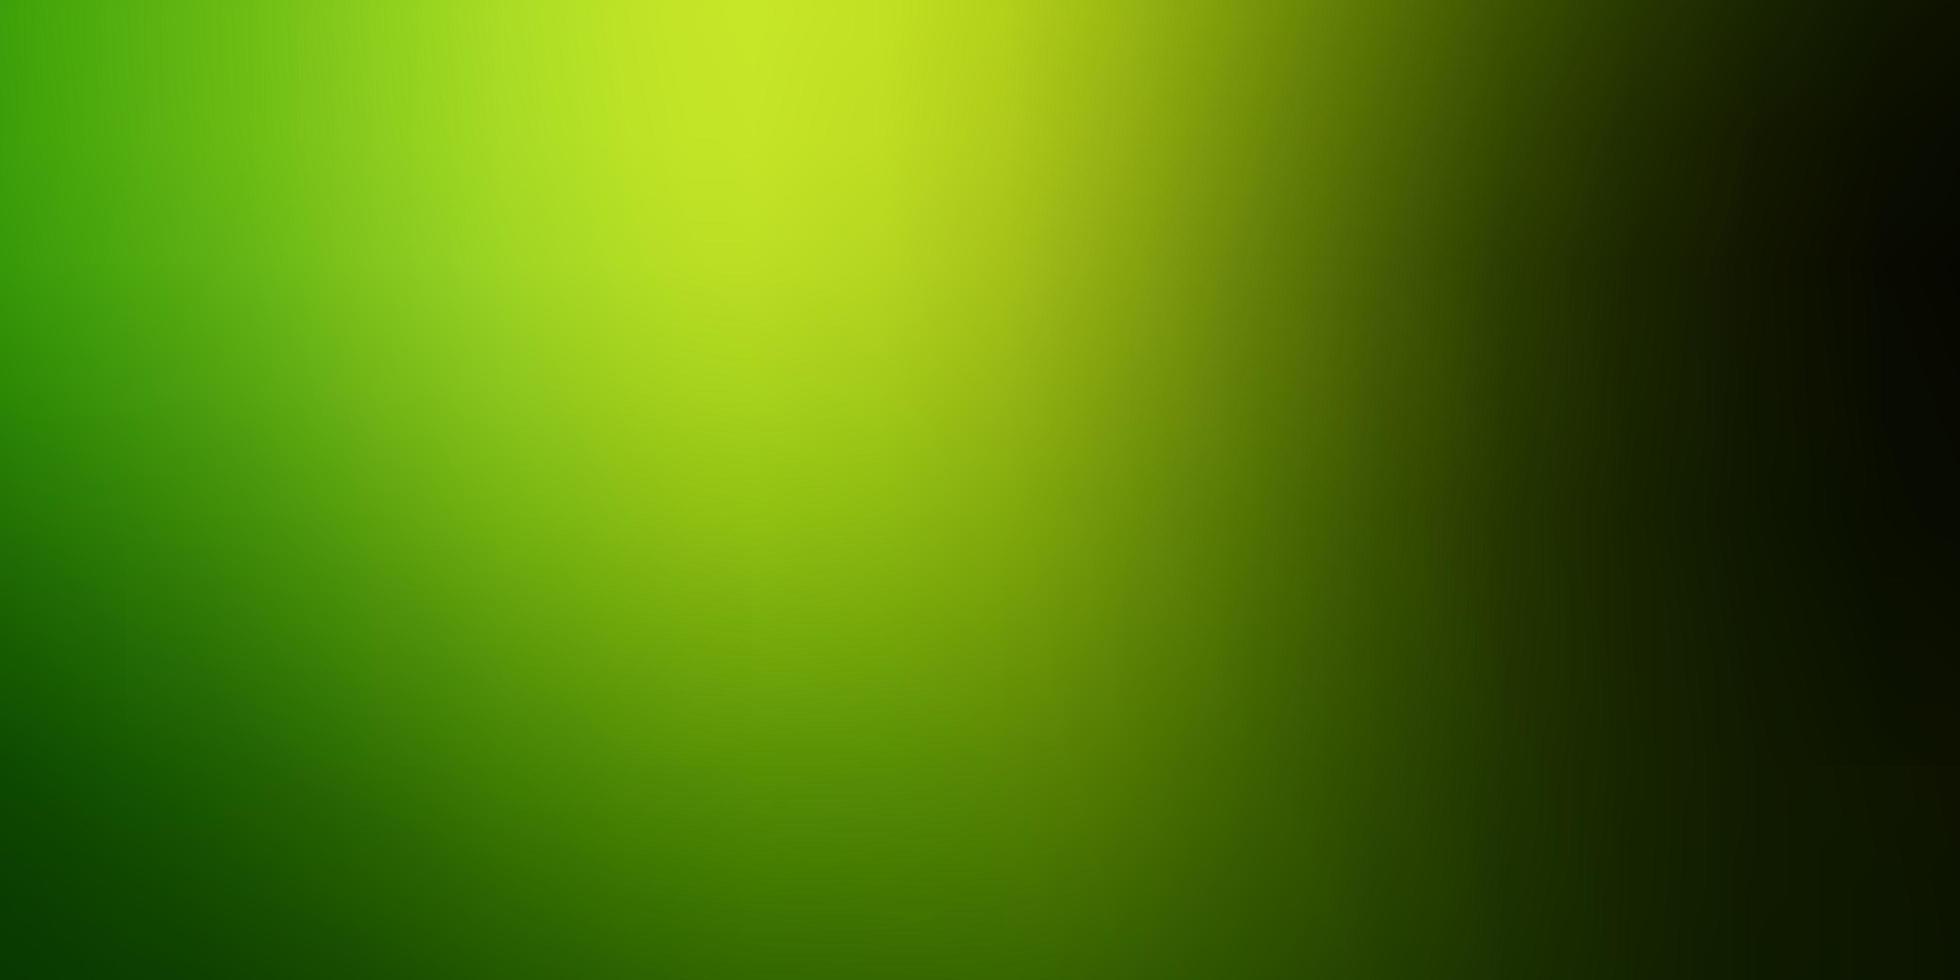 Light Green vector blurred colorful pattern.